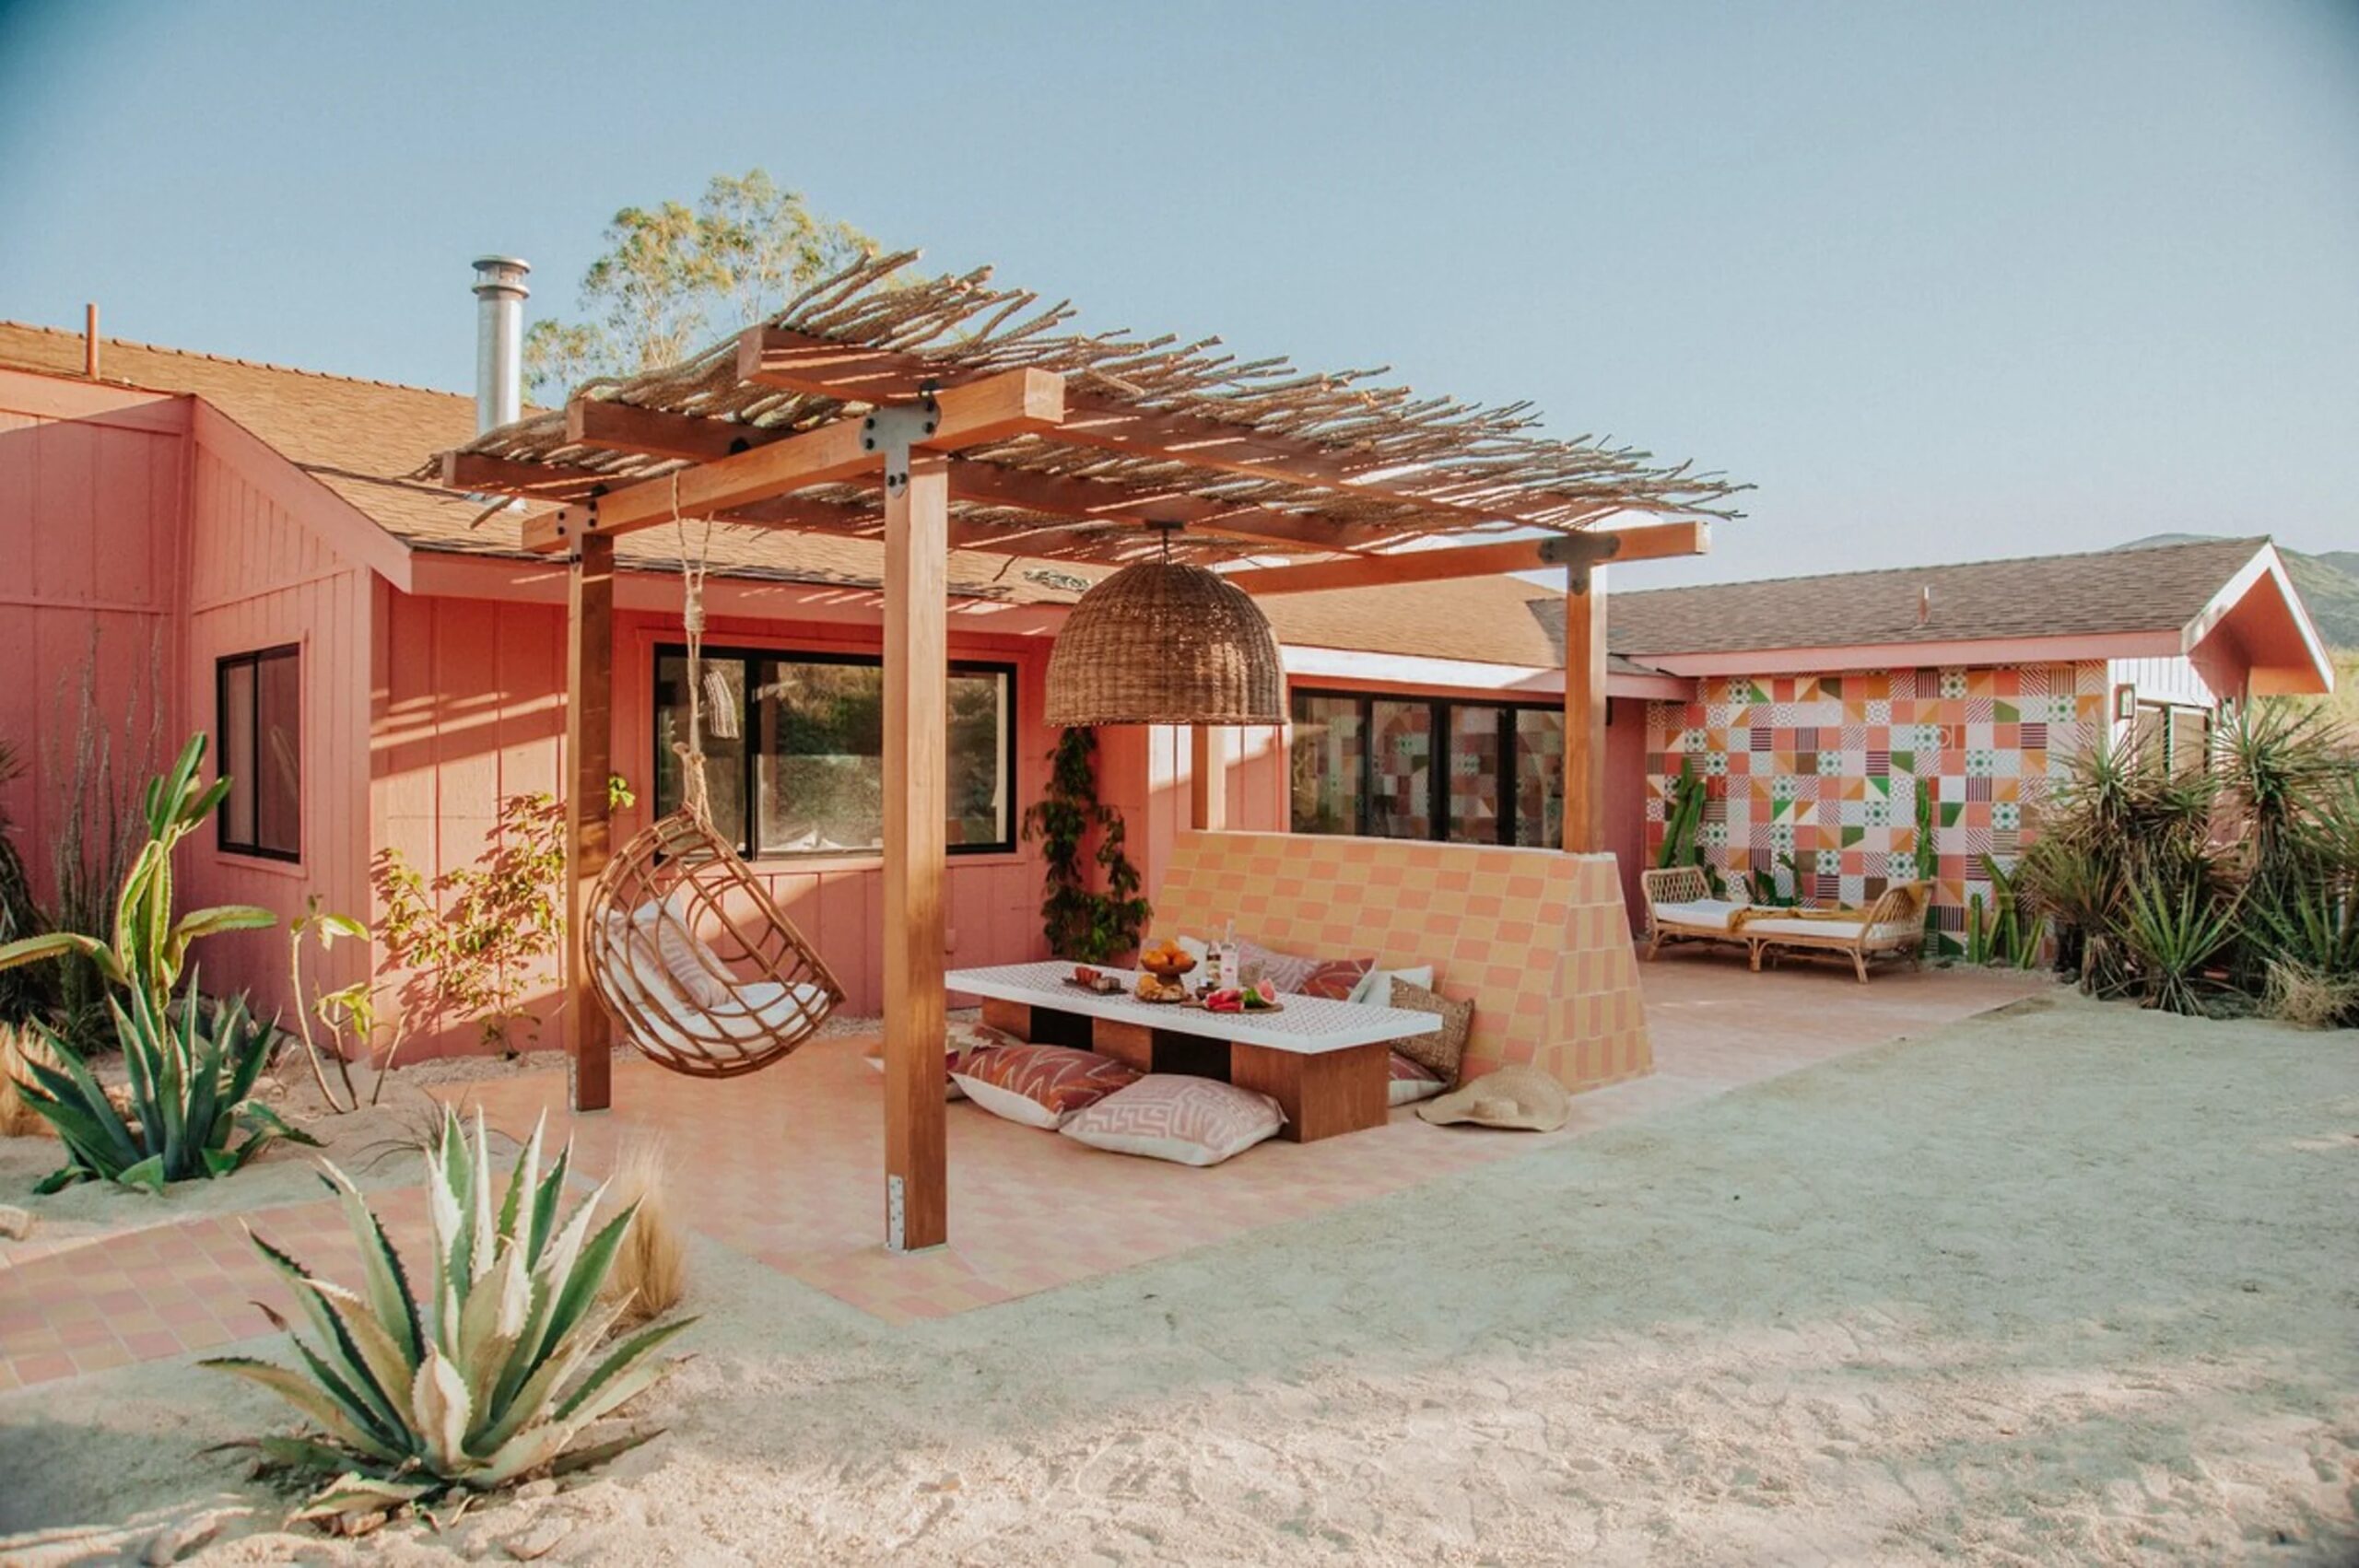 Exterior view of a pergola and dining or lounging spaces at pastel toned Desierto Occidental vacation rental home near Joshua Tree National Park, California.